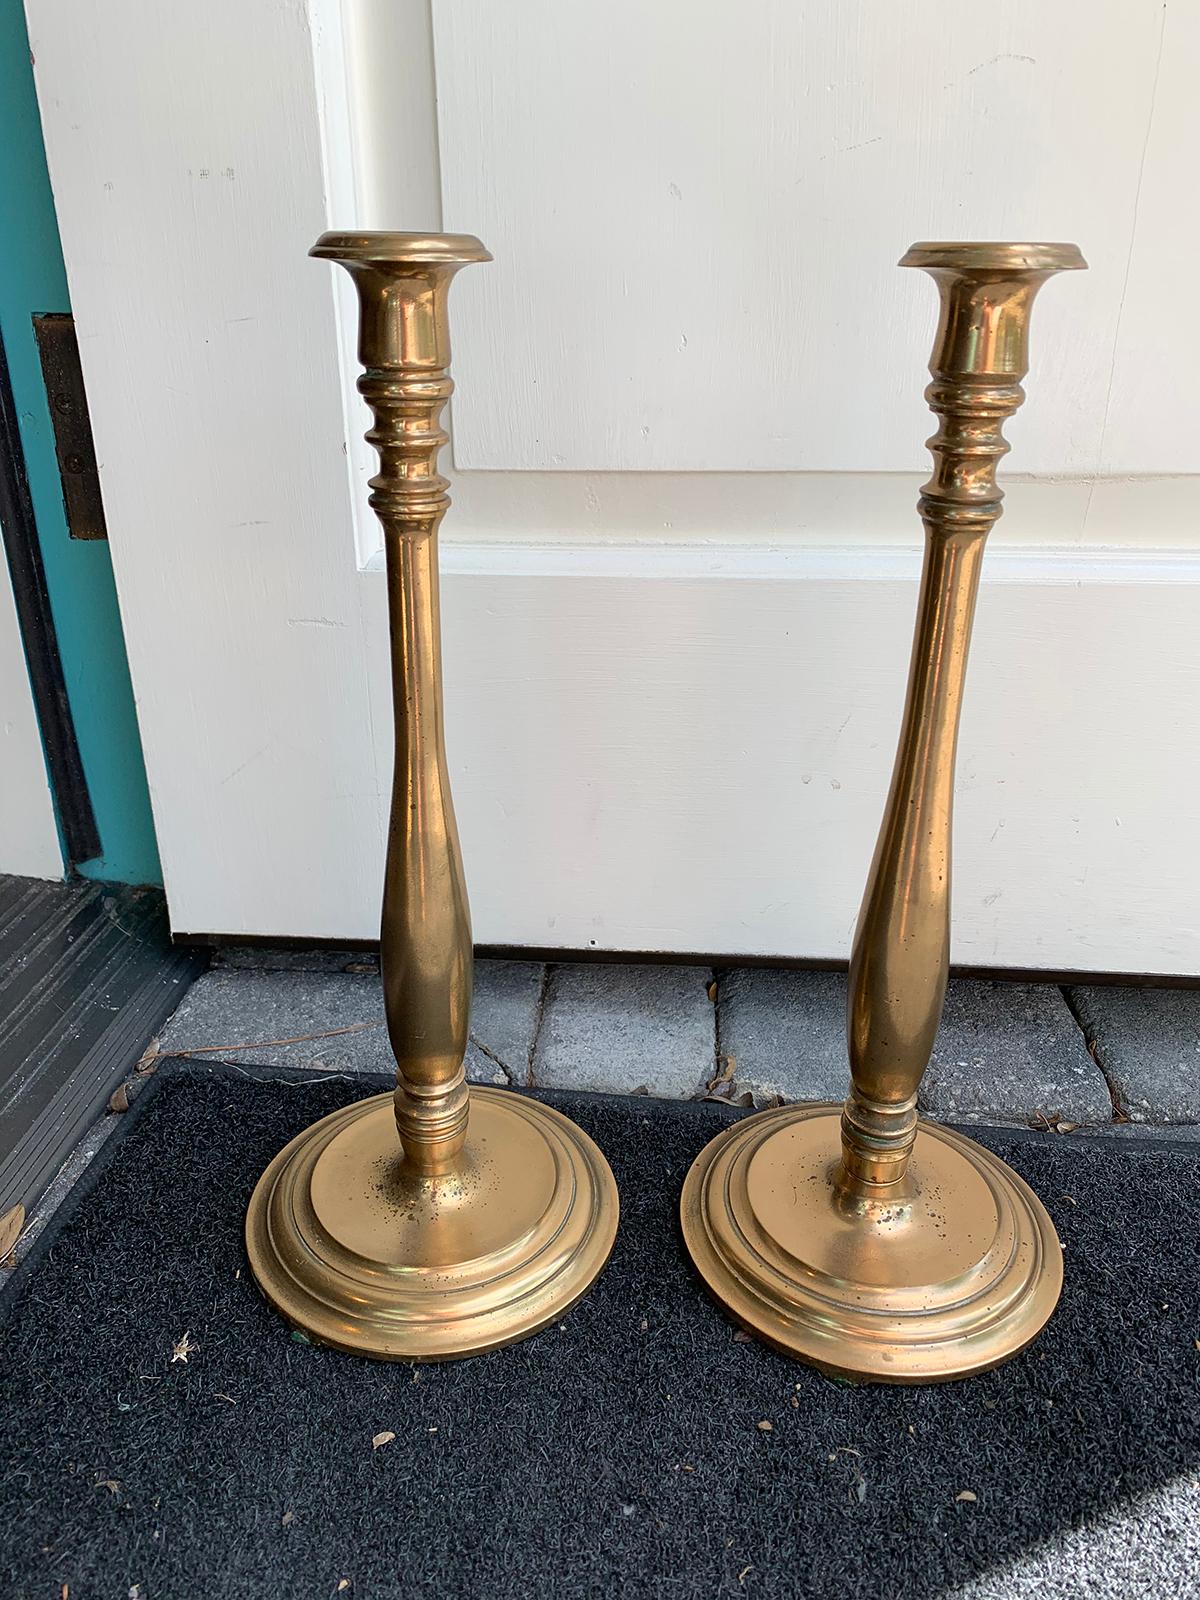 Pair of early 20th century bronze candlesticks.